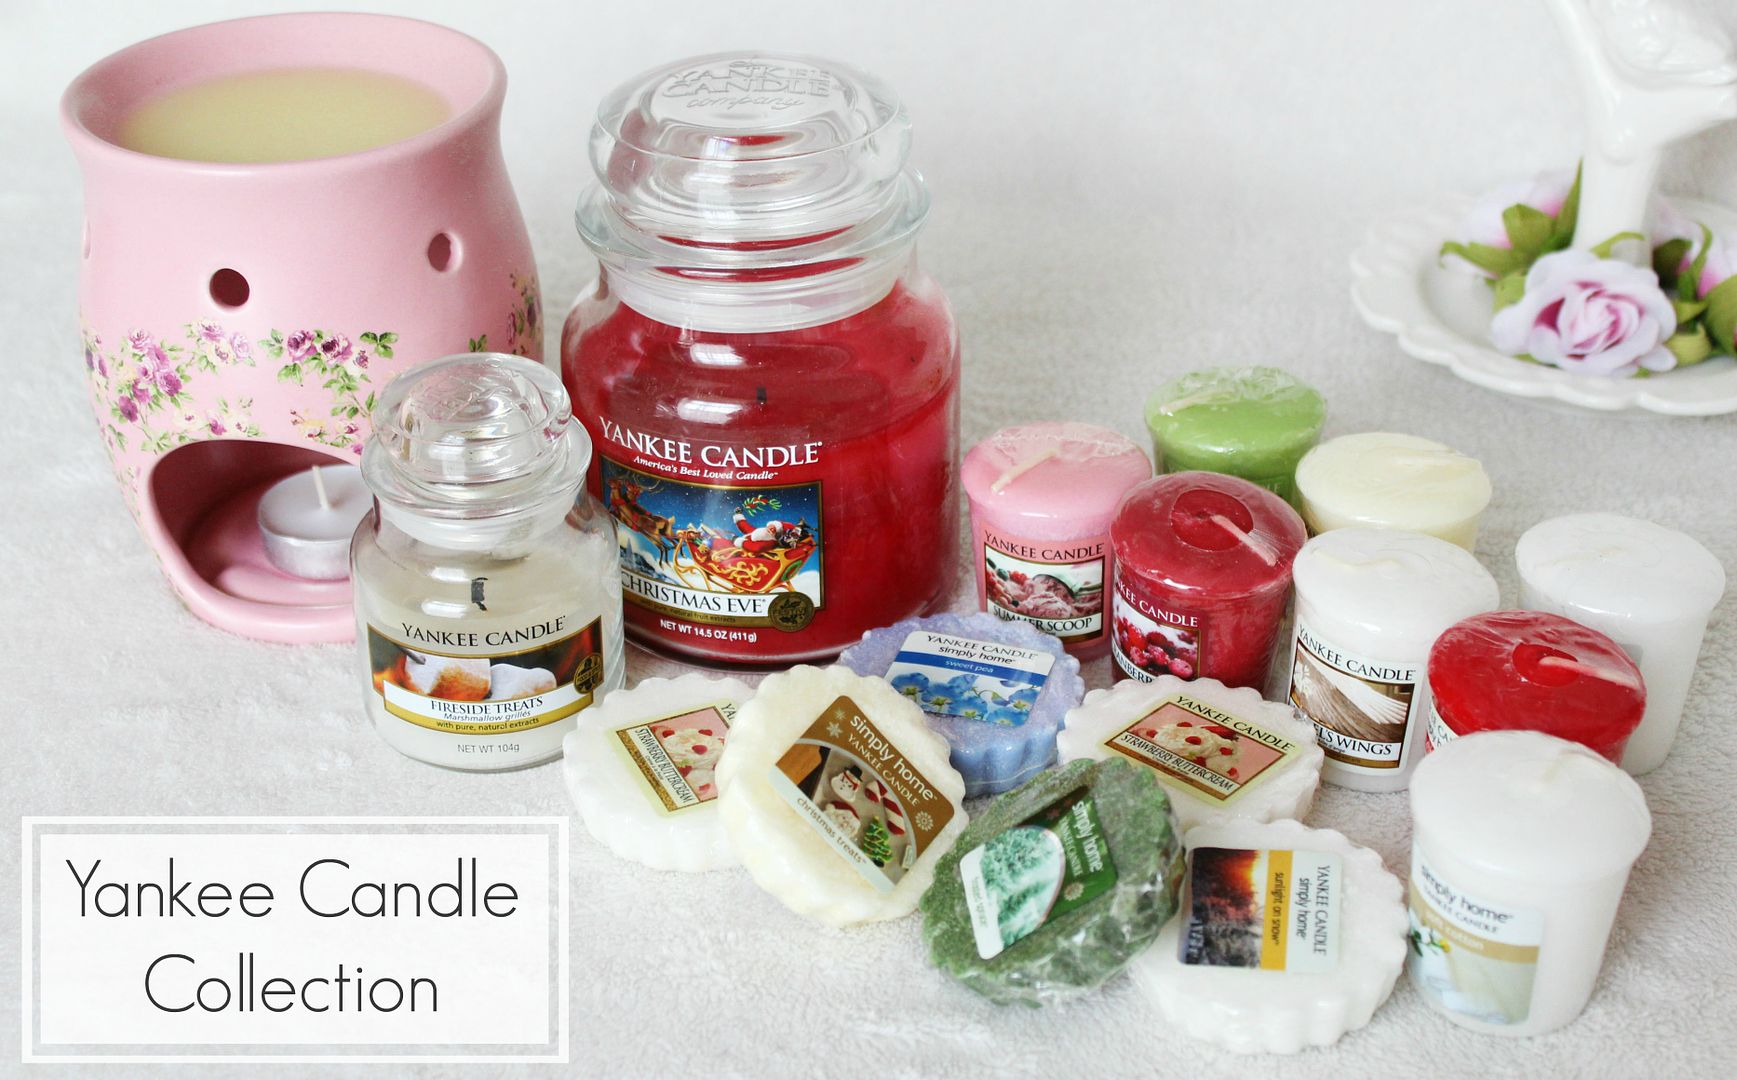 Yankee-Candle-Collection-Jar-Votive-Samplers-Wax-Melts-Tarts-Christmas-Wiinter-Spring-Fresh-Scents-Belle-Amie-UK-Beauty-Fashion-Lifestyle-Blog